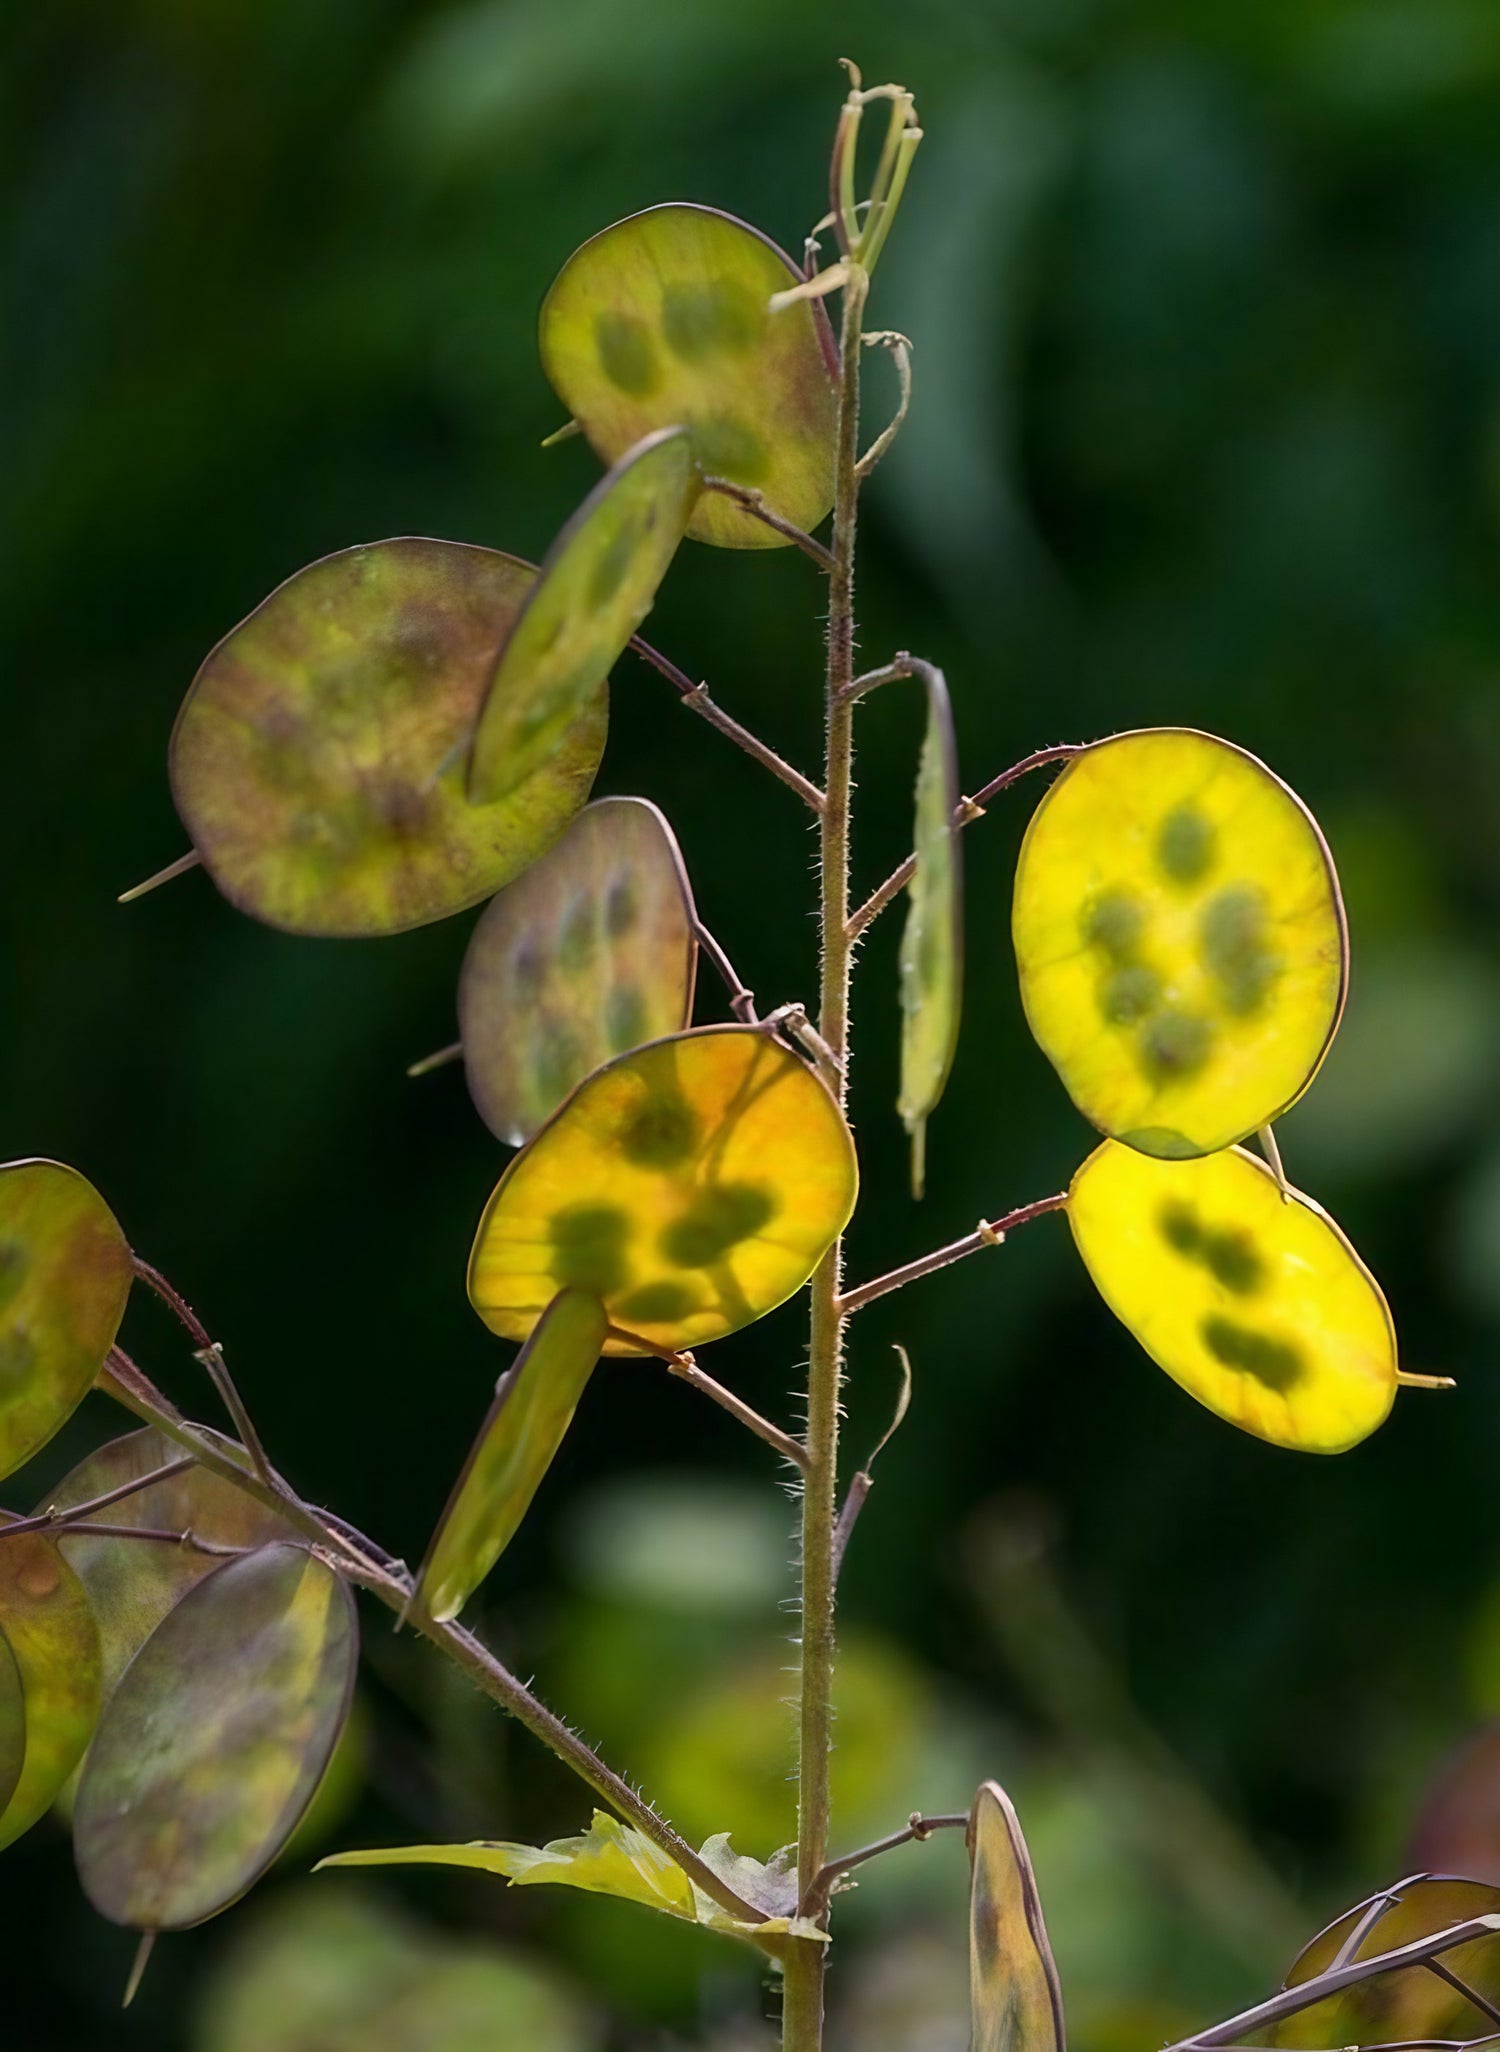 Variegated leaves of the Honesty plant, showcasing both green and yellow foliage